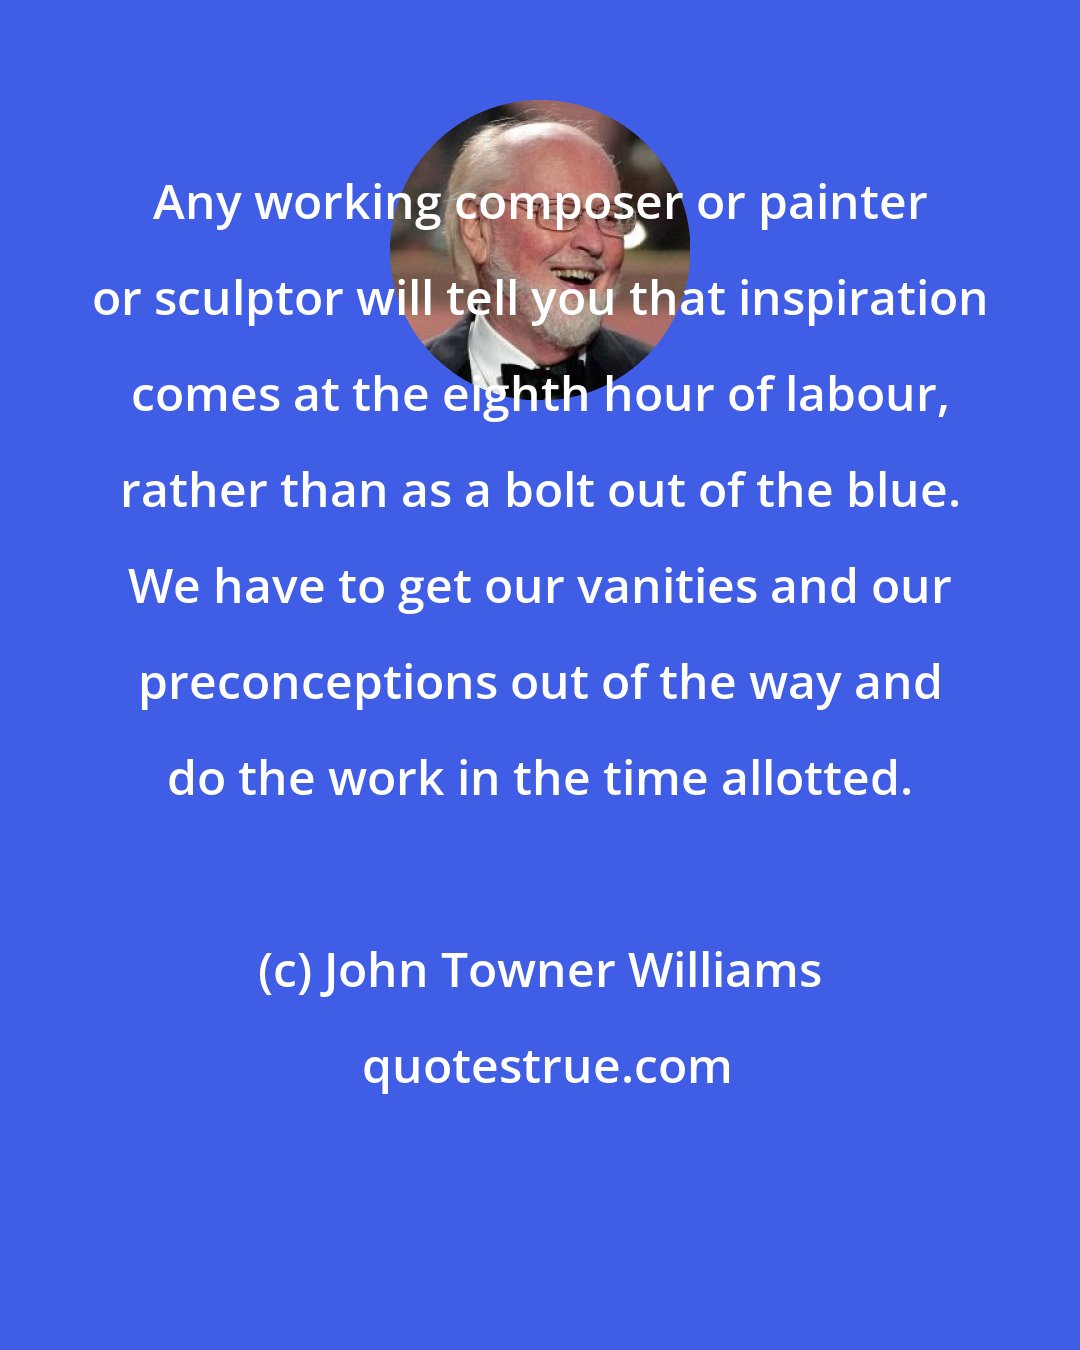 John Towner Williams: Any working composer or painter or sculptor will tell you that inspiration comes at the eighth hour of labour, rather than as a bolt out of the blue. We have to get our vanities and our preconceptions out of the way and do the work in the time allotted.